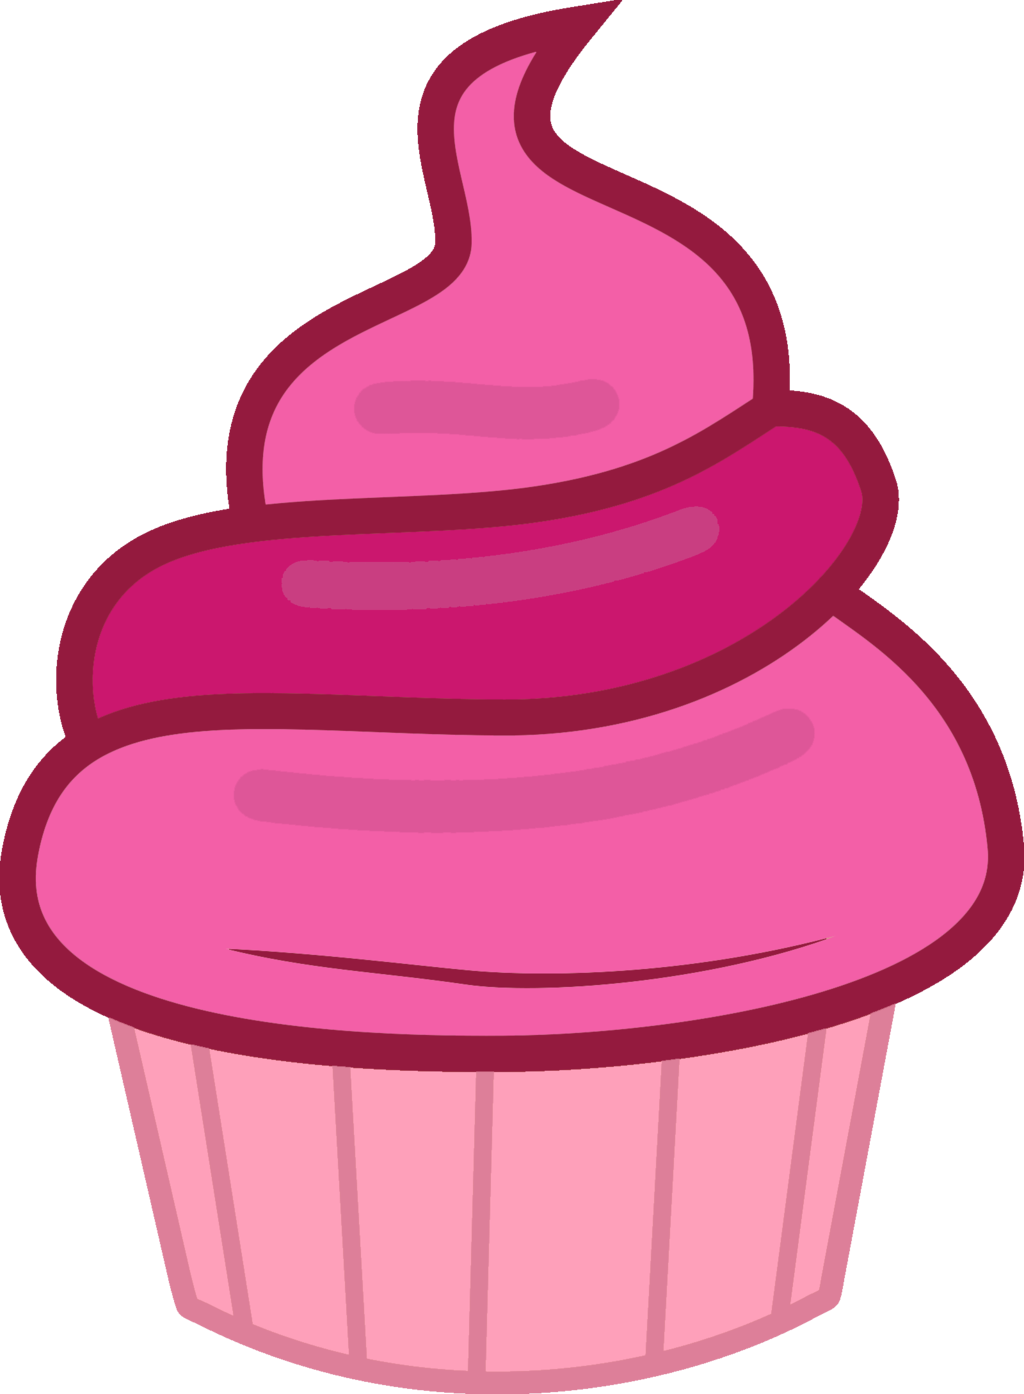 Desserts clipart animation. Animated cupcake group images